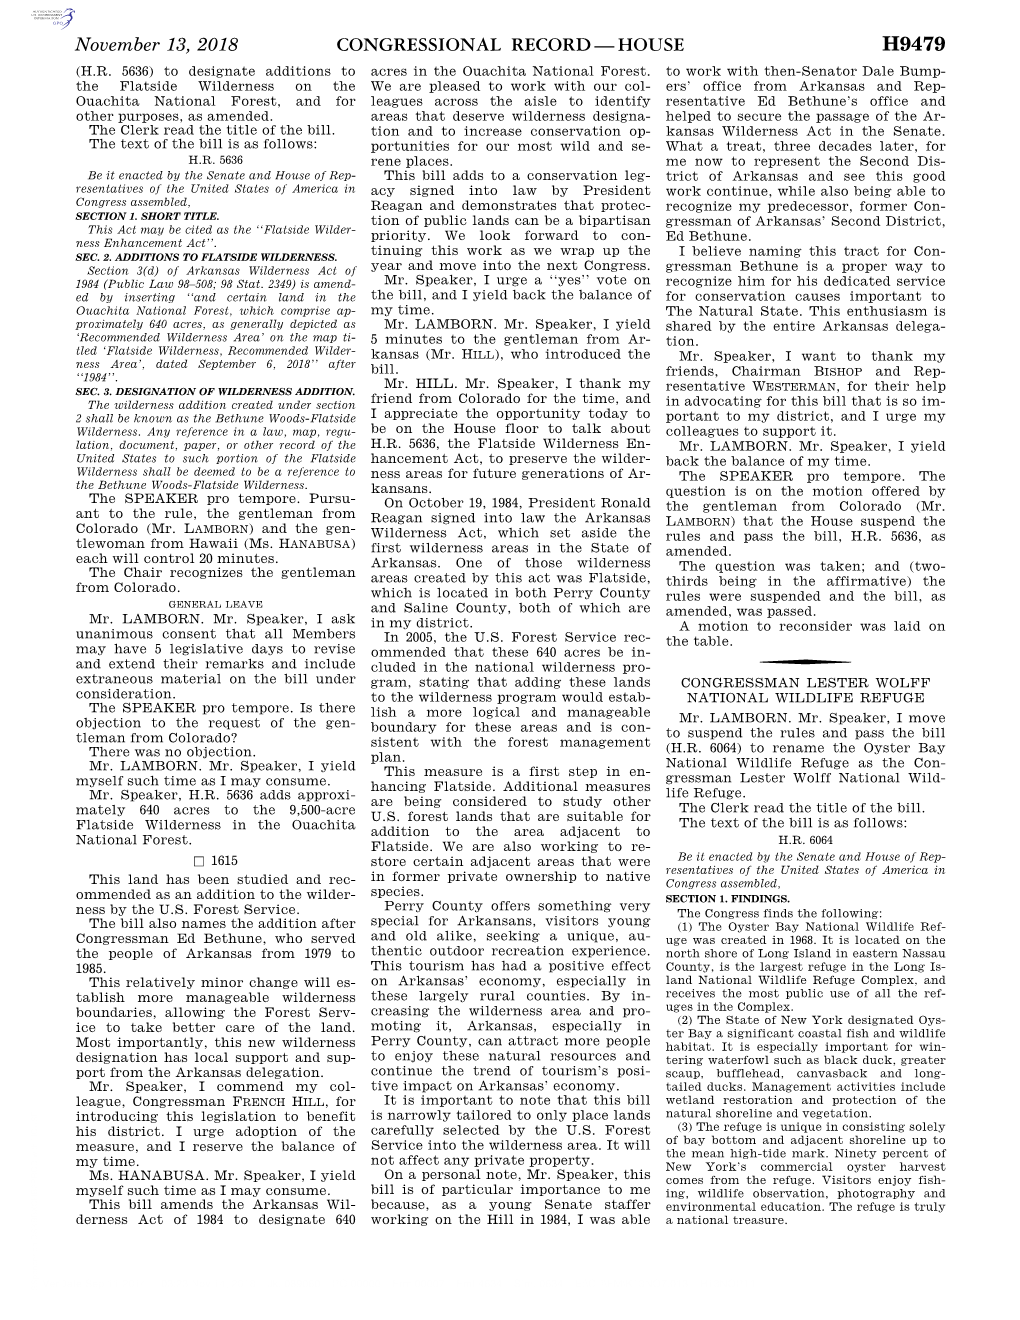 Congressional Record—House H9479